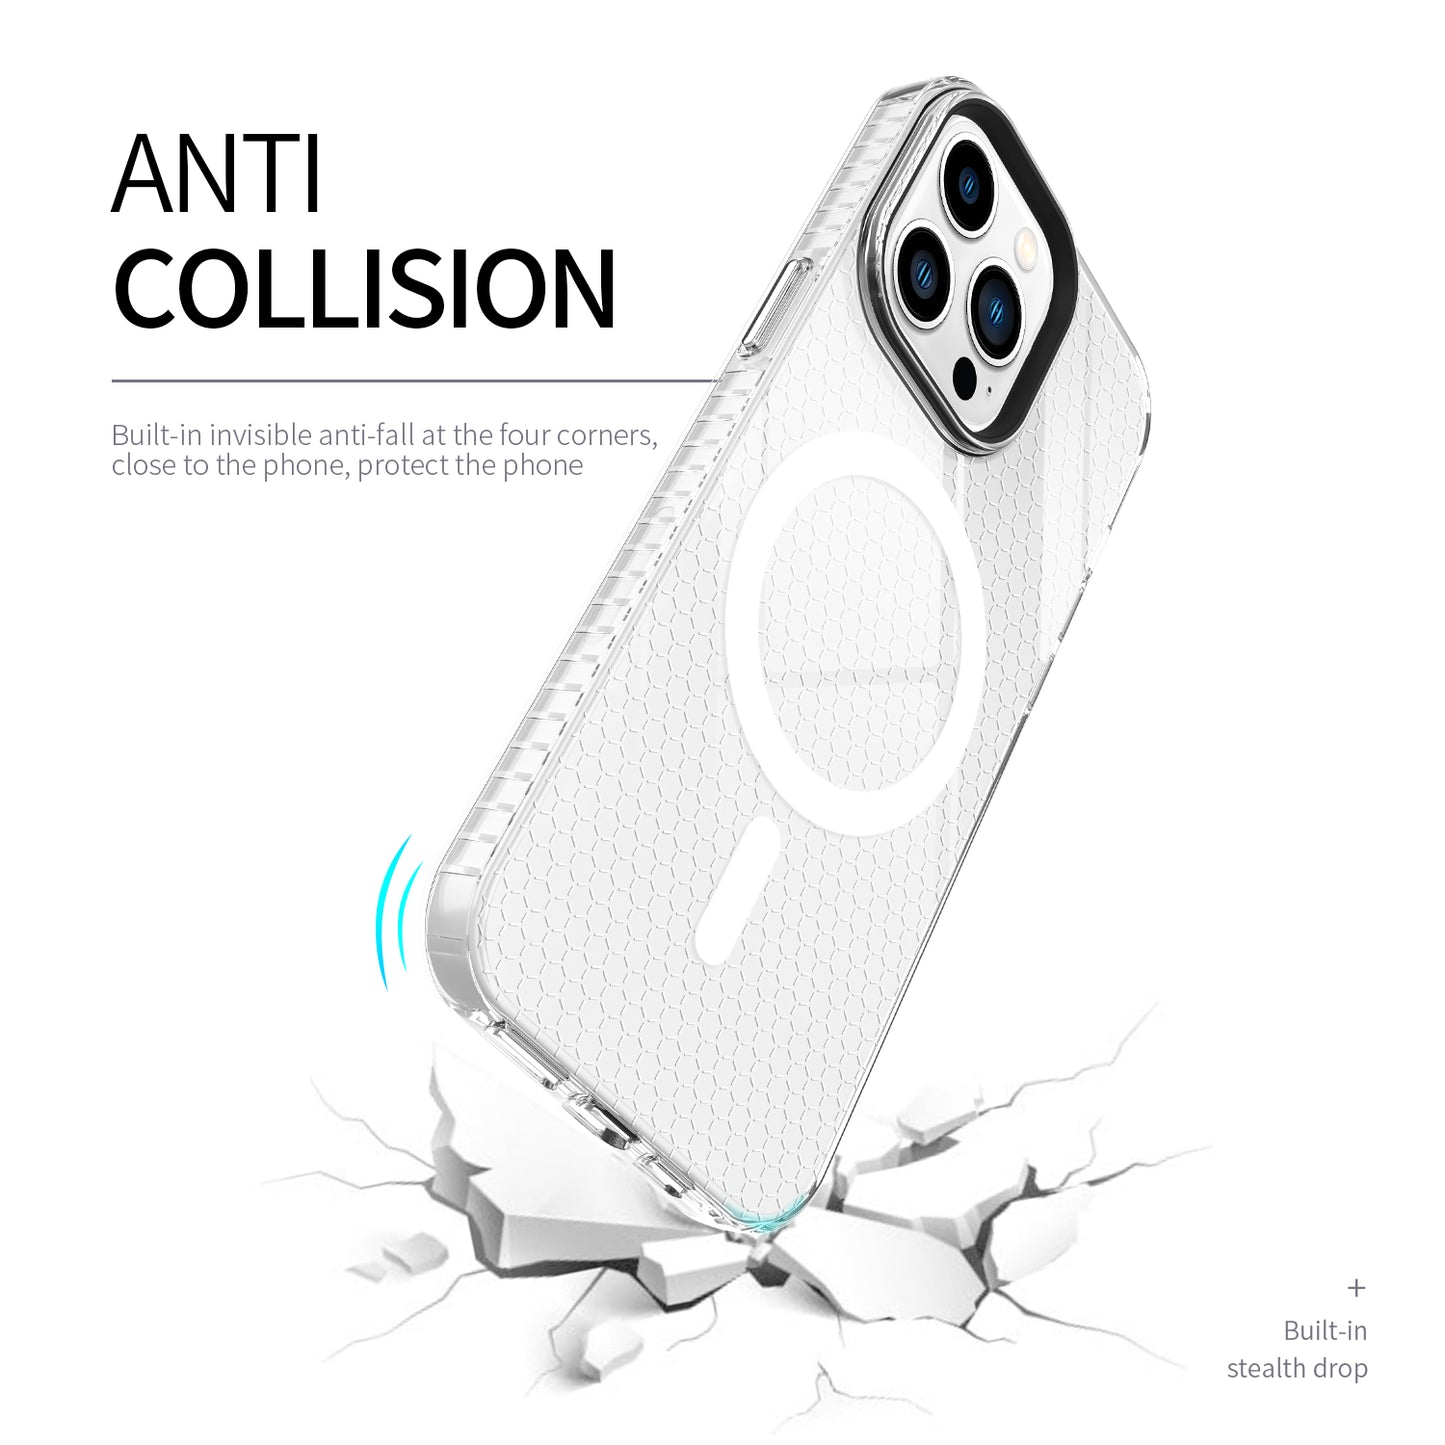 magnetic designer phone case shockproof waterproof pc tpu mobile phone cases for iphone 11